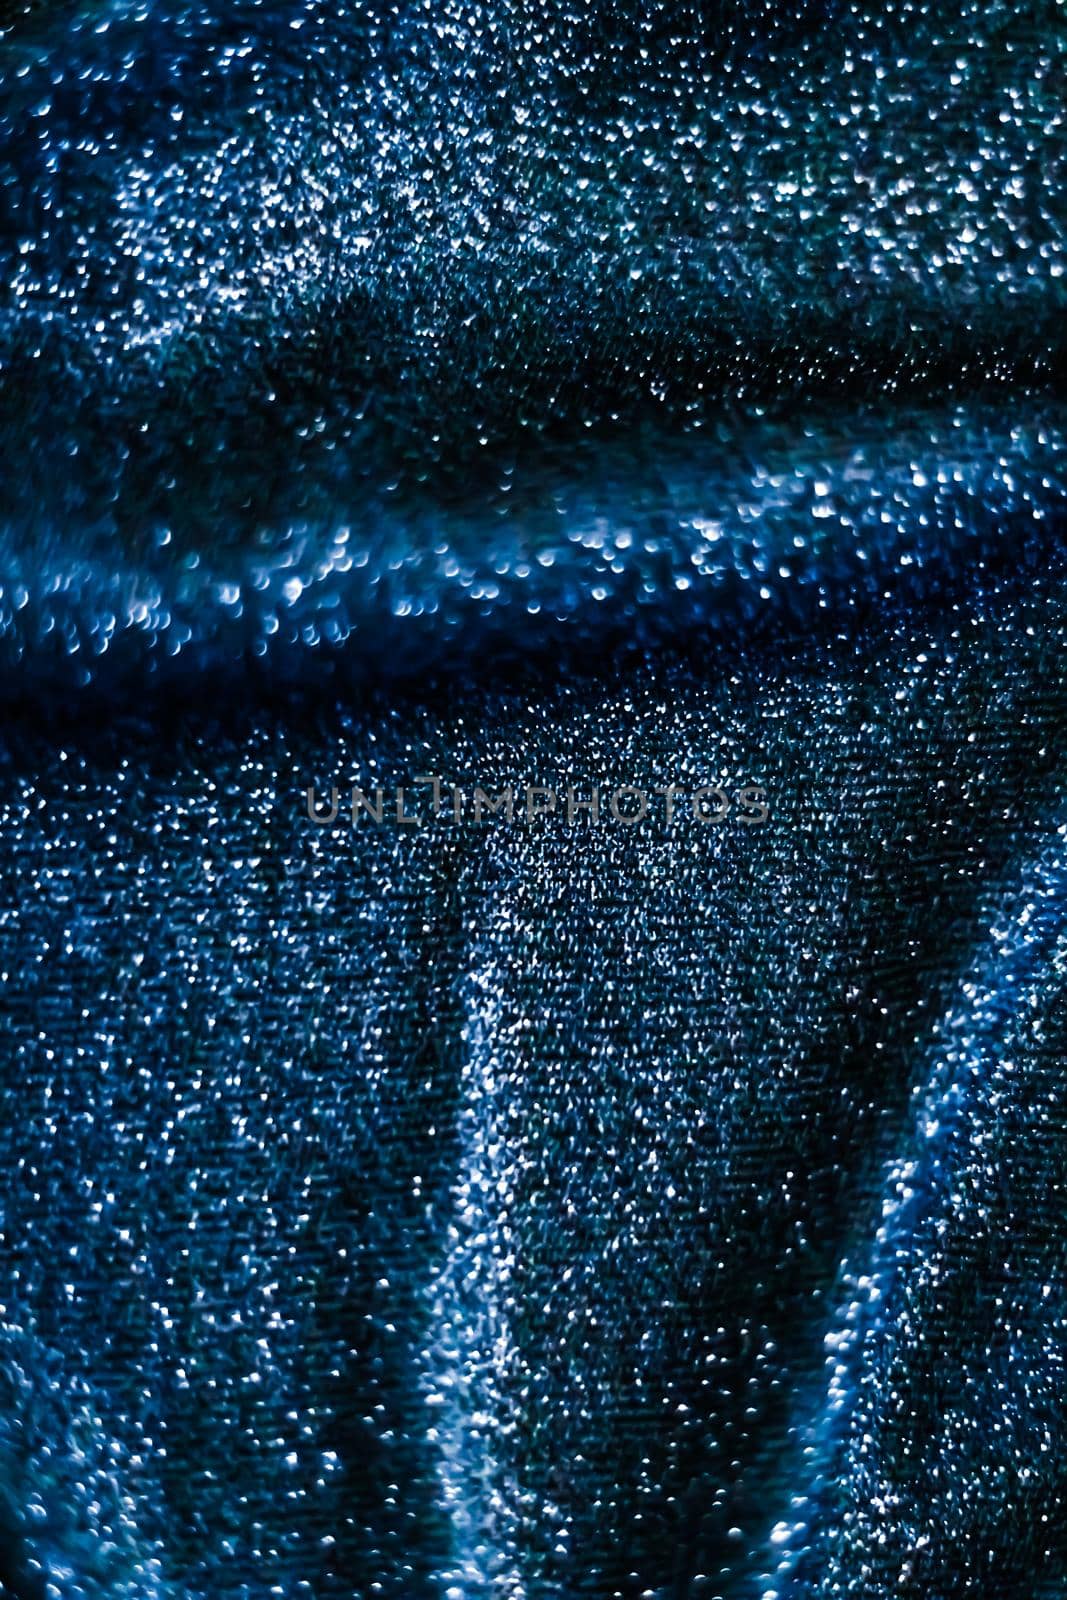 Blue holiday sparkling glitter abstract background, luxury shiny fabric material for glamour design and festive invitation by Anneleven